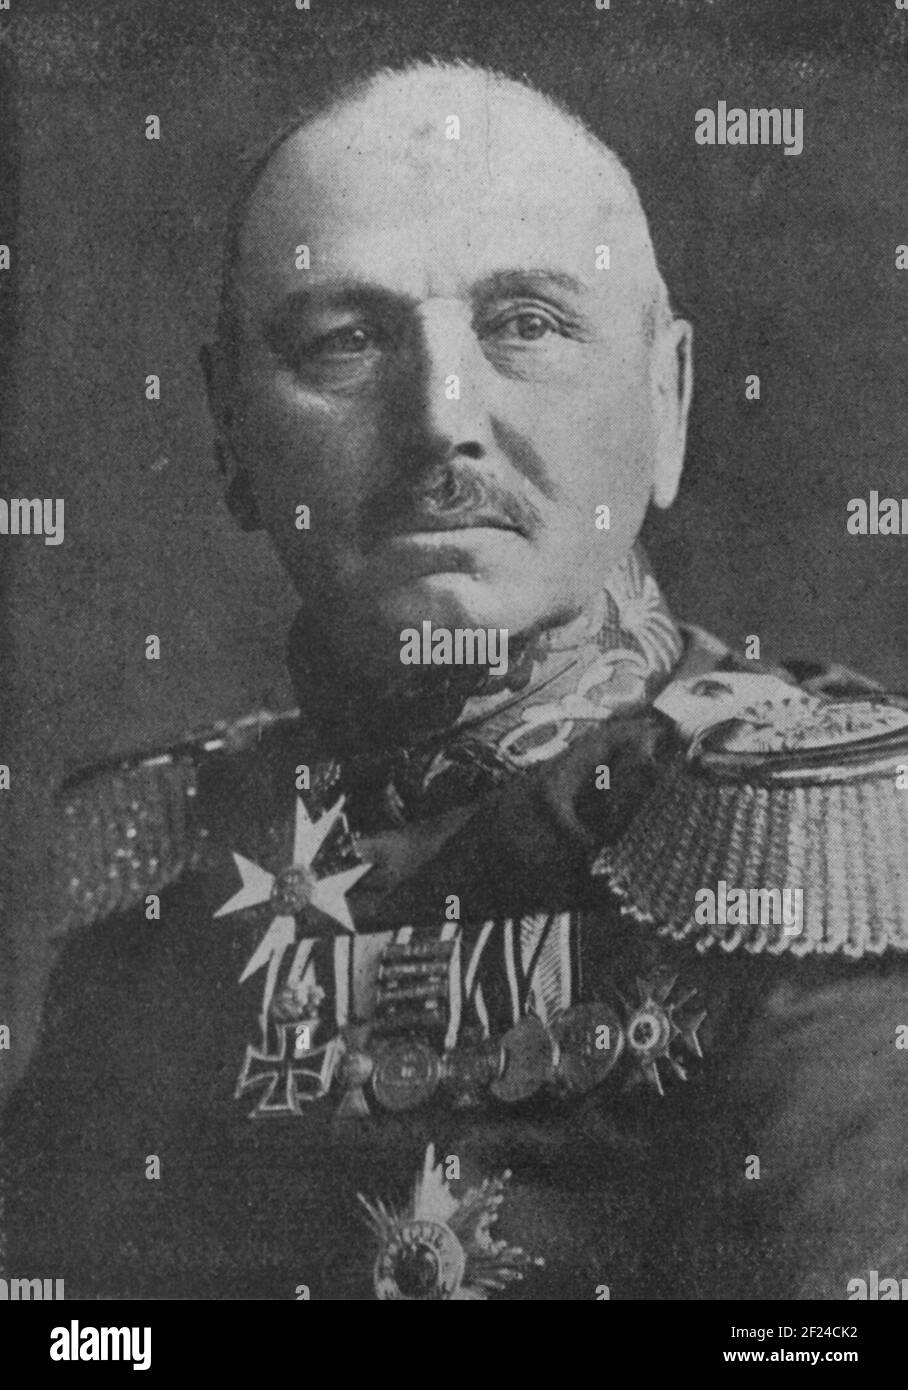 A vintage photo circa 1915 of the German general Alexander Heinrich Rudolph von Kluck (20 May 1846 – 19 October 1934).  At the outbreak of World War I, Kluck was placed in command of the German First Army Stock Photo